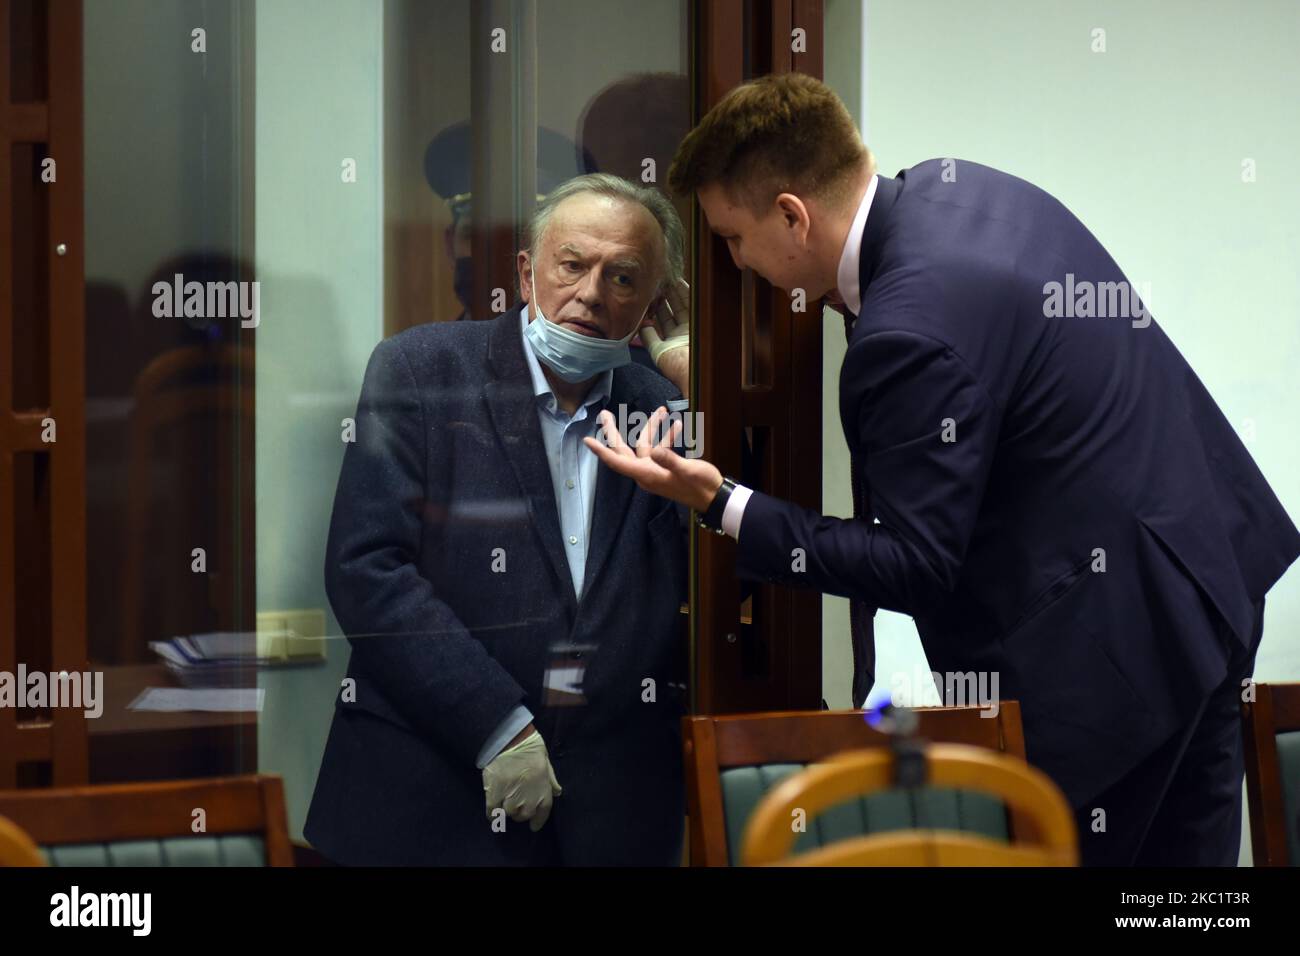 Russian historian Oleg Sokolov, who is accused of killing his girlfriend and former student Anastasia Yeshchenko, speaks to his lawyer in a court room in St. Petersburg, Russia on October 14, 2020. (Photo by Sergey Nikolaev/NurPhoto) Stock Photo